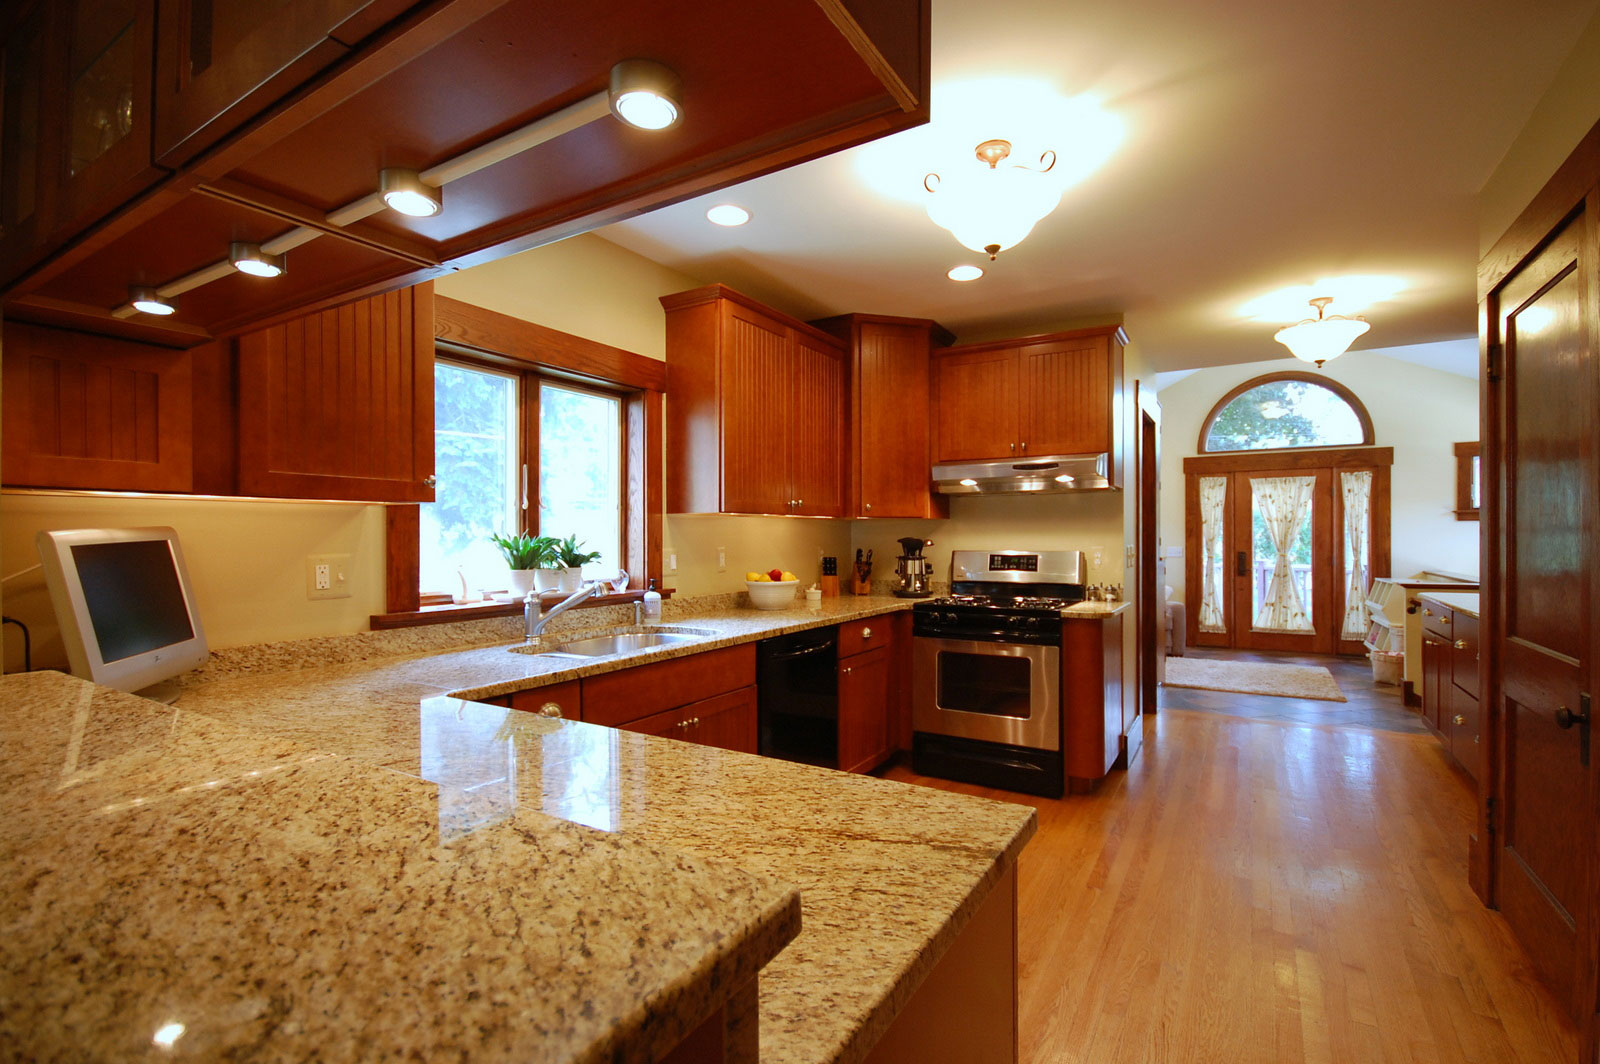 Kitchen Design With Contemporary Kitchen Design Interior Decorated With Marvelous Wooden Kitchen Cabinet And Cream Granite Kitchen Countertops Decor Kitchen Popular Granite Kitchen Countertops You Can Recreate At Home!